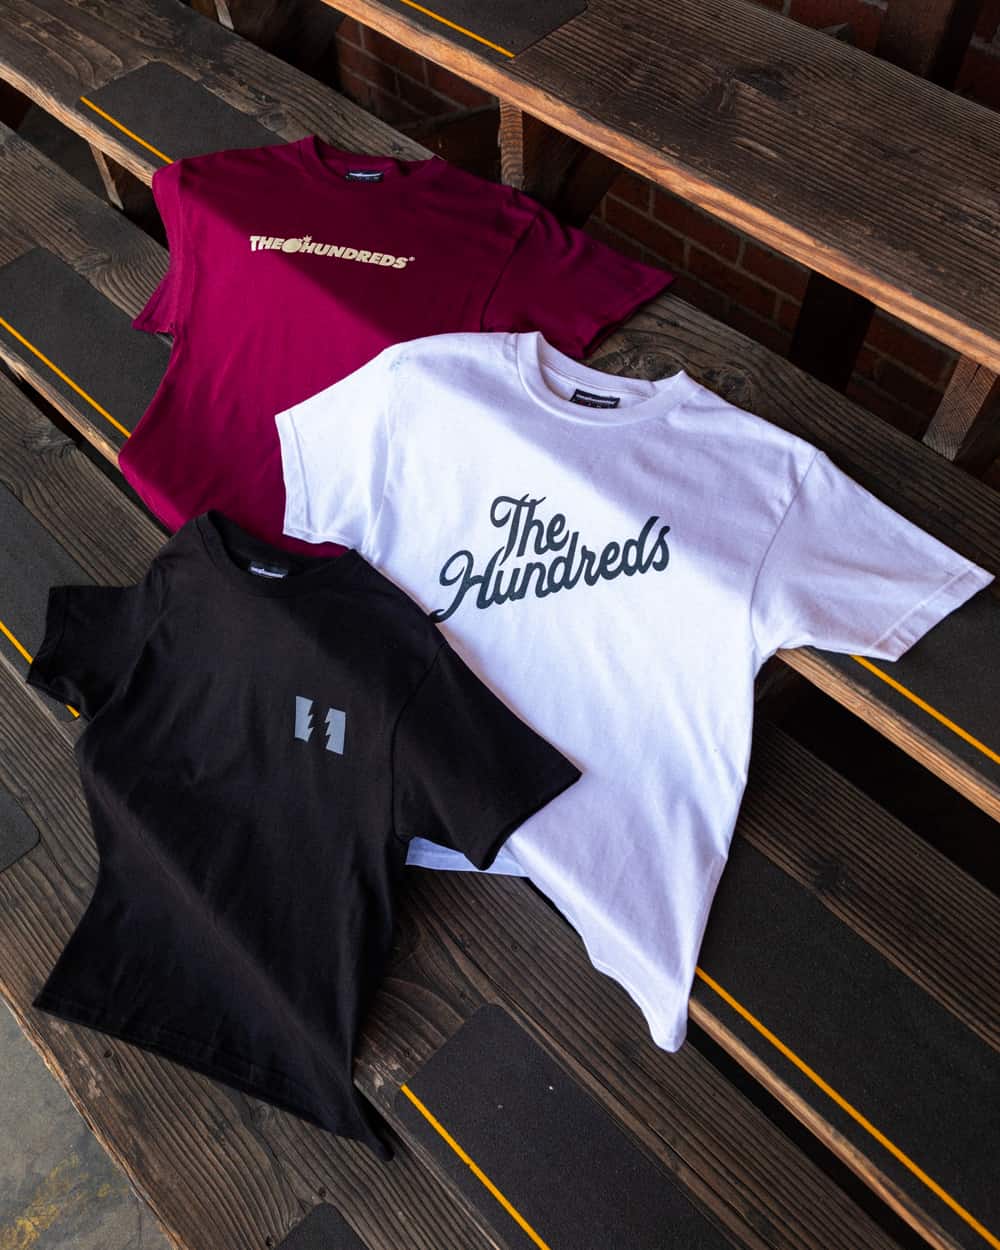 Three The Hundreds printed T-shirts in maroon, white and black laid out on bleachers